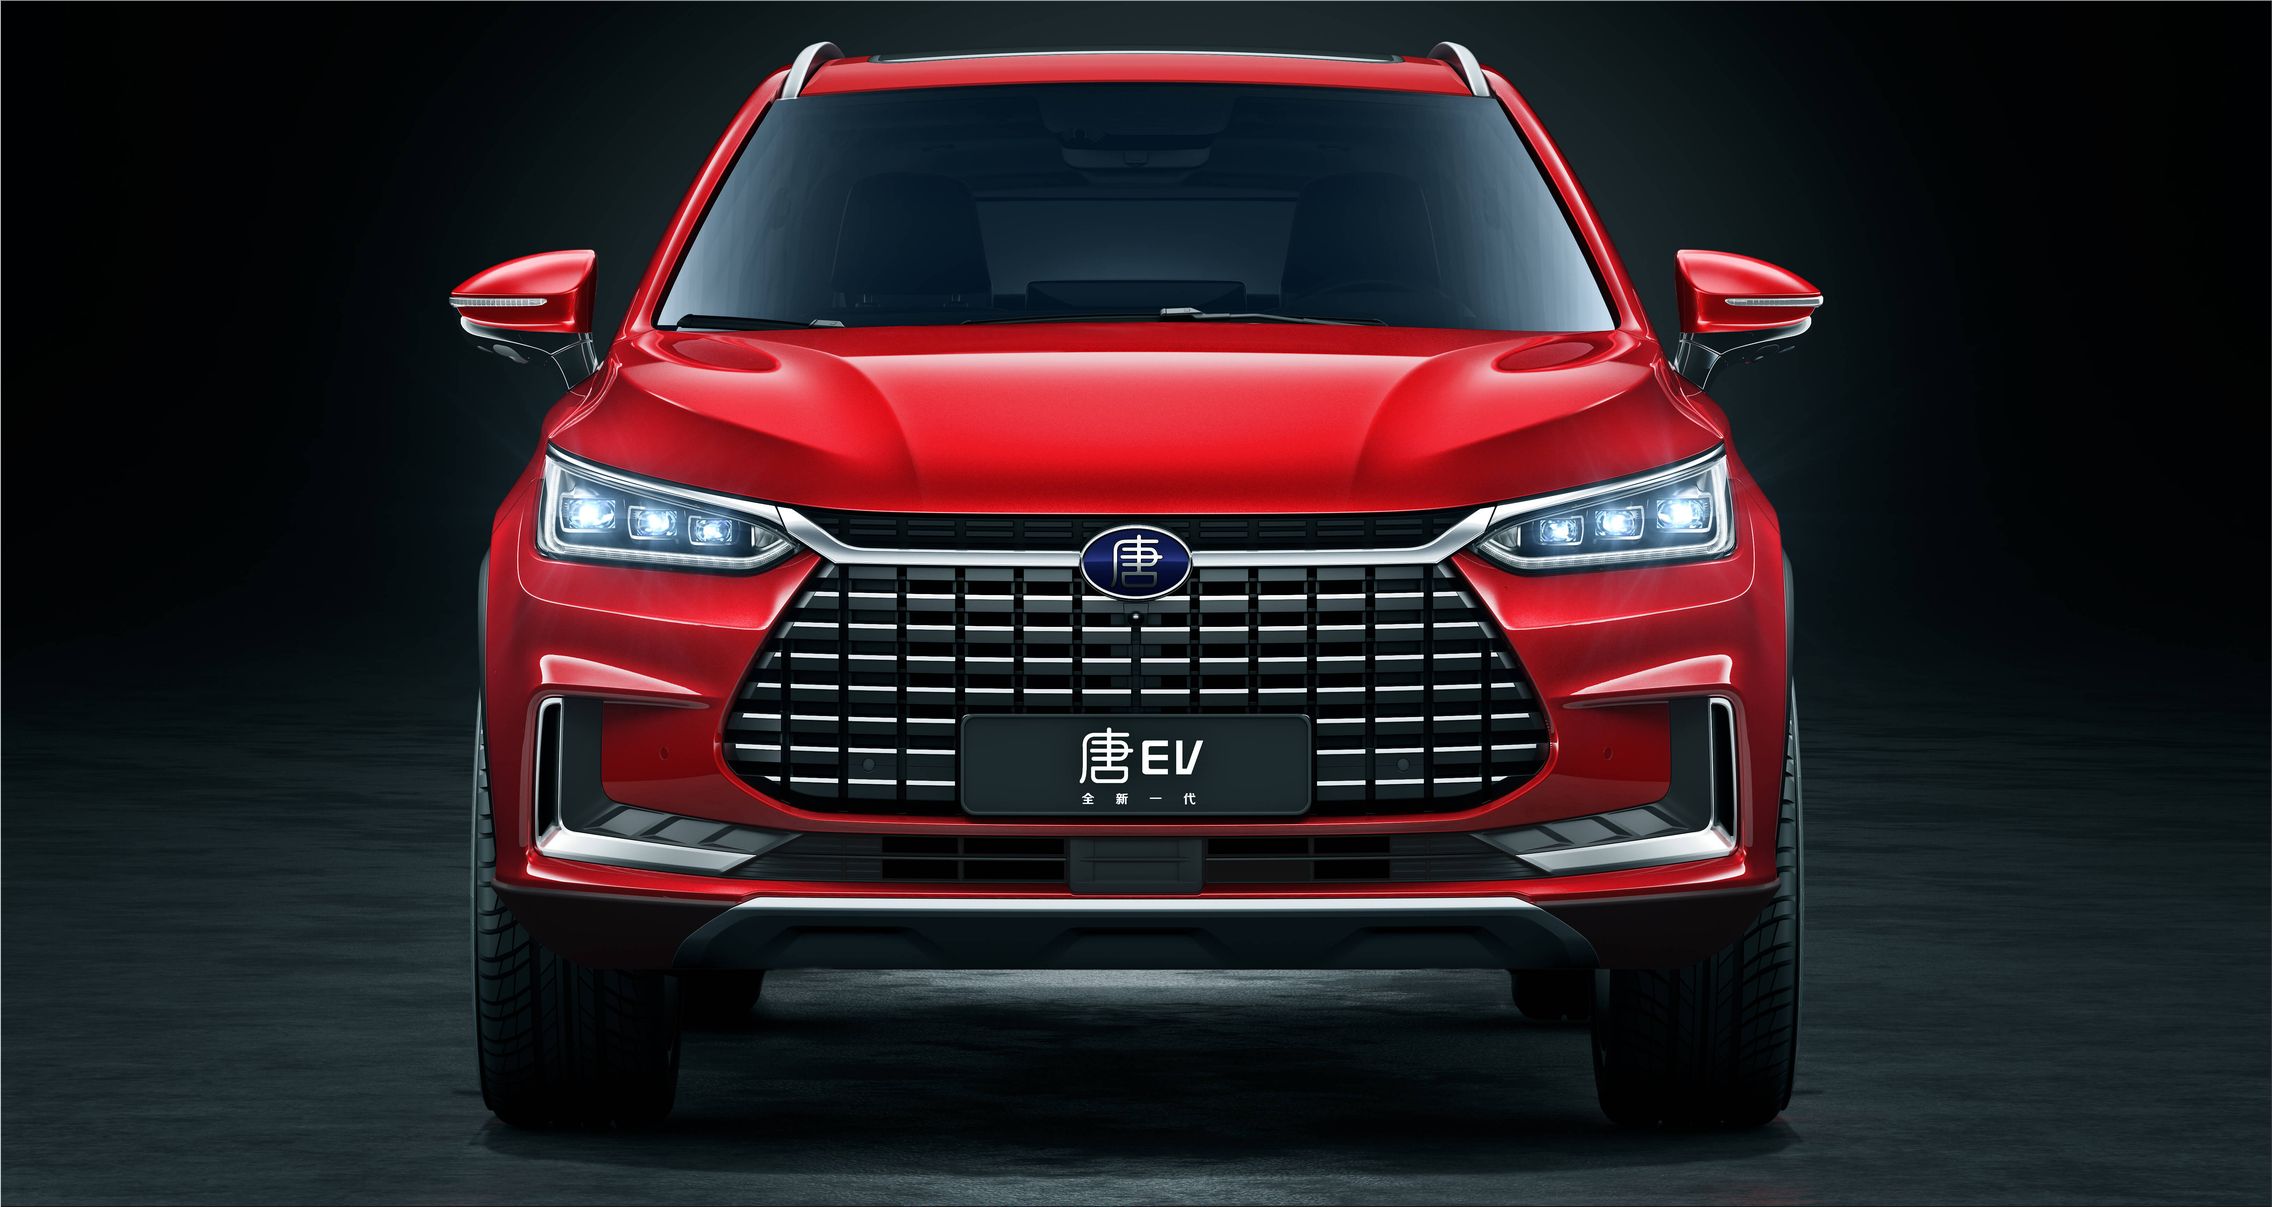 The Chinese electric car manufacturer BYD plans to launch in Europe